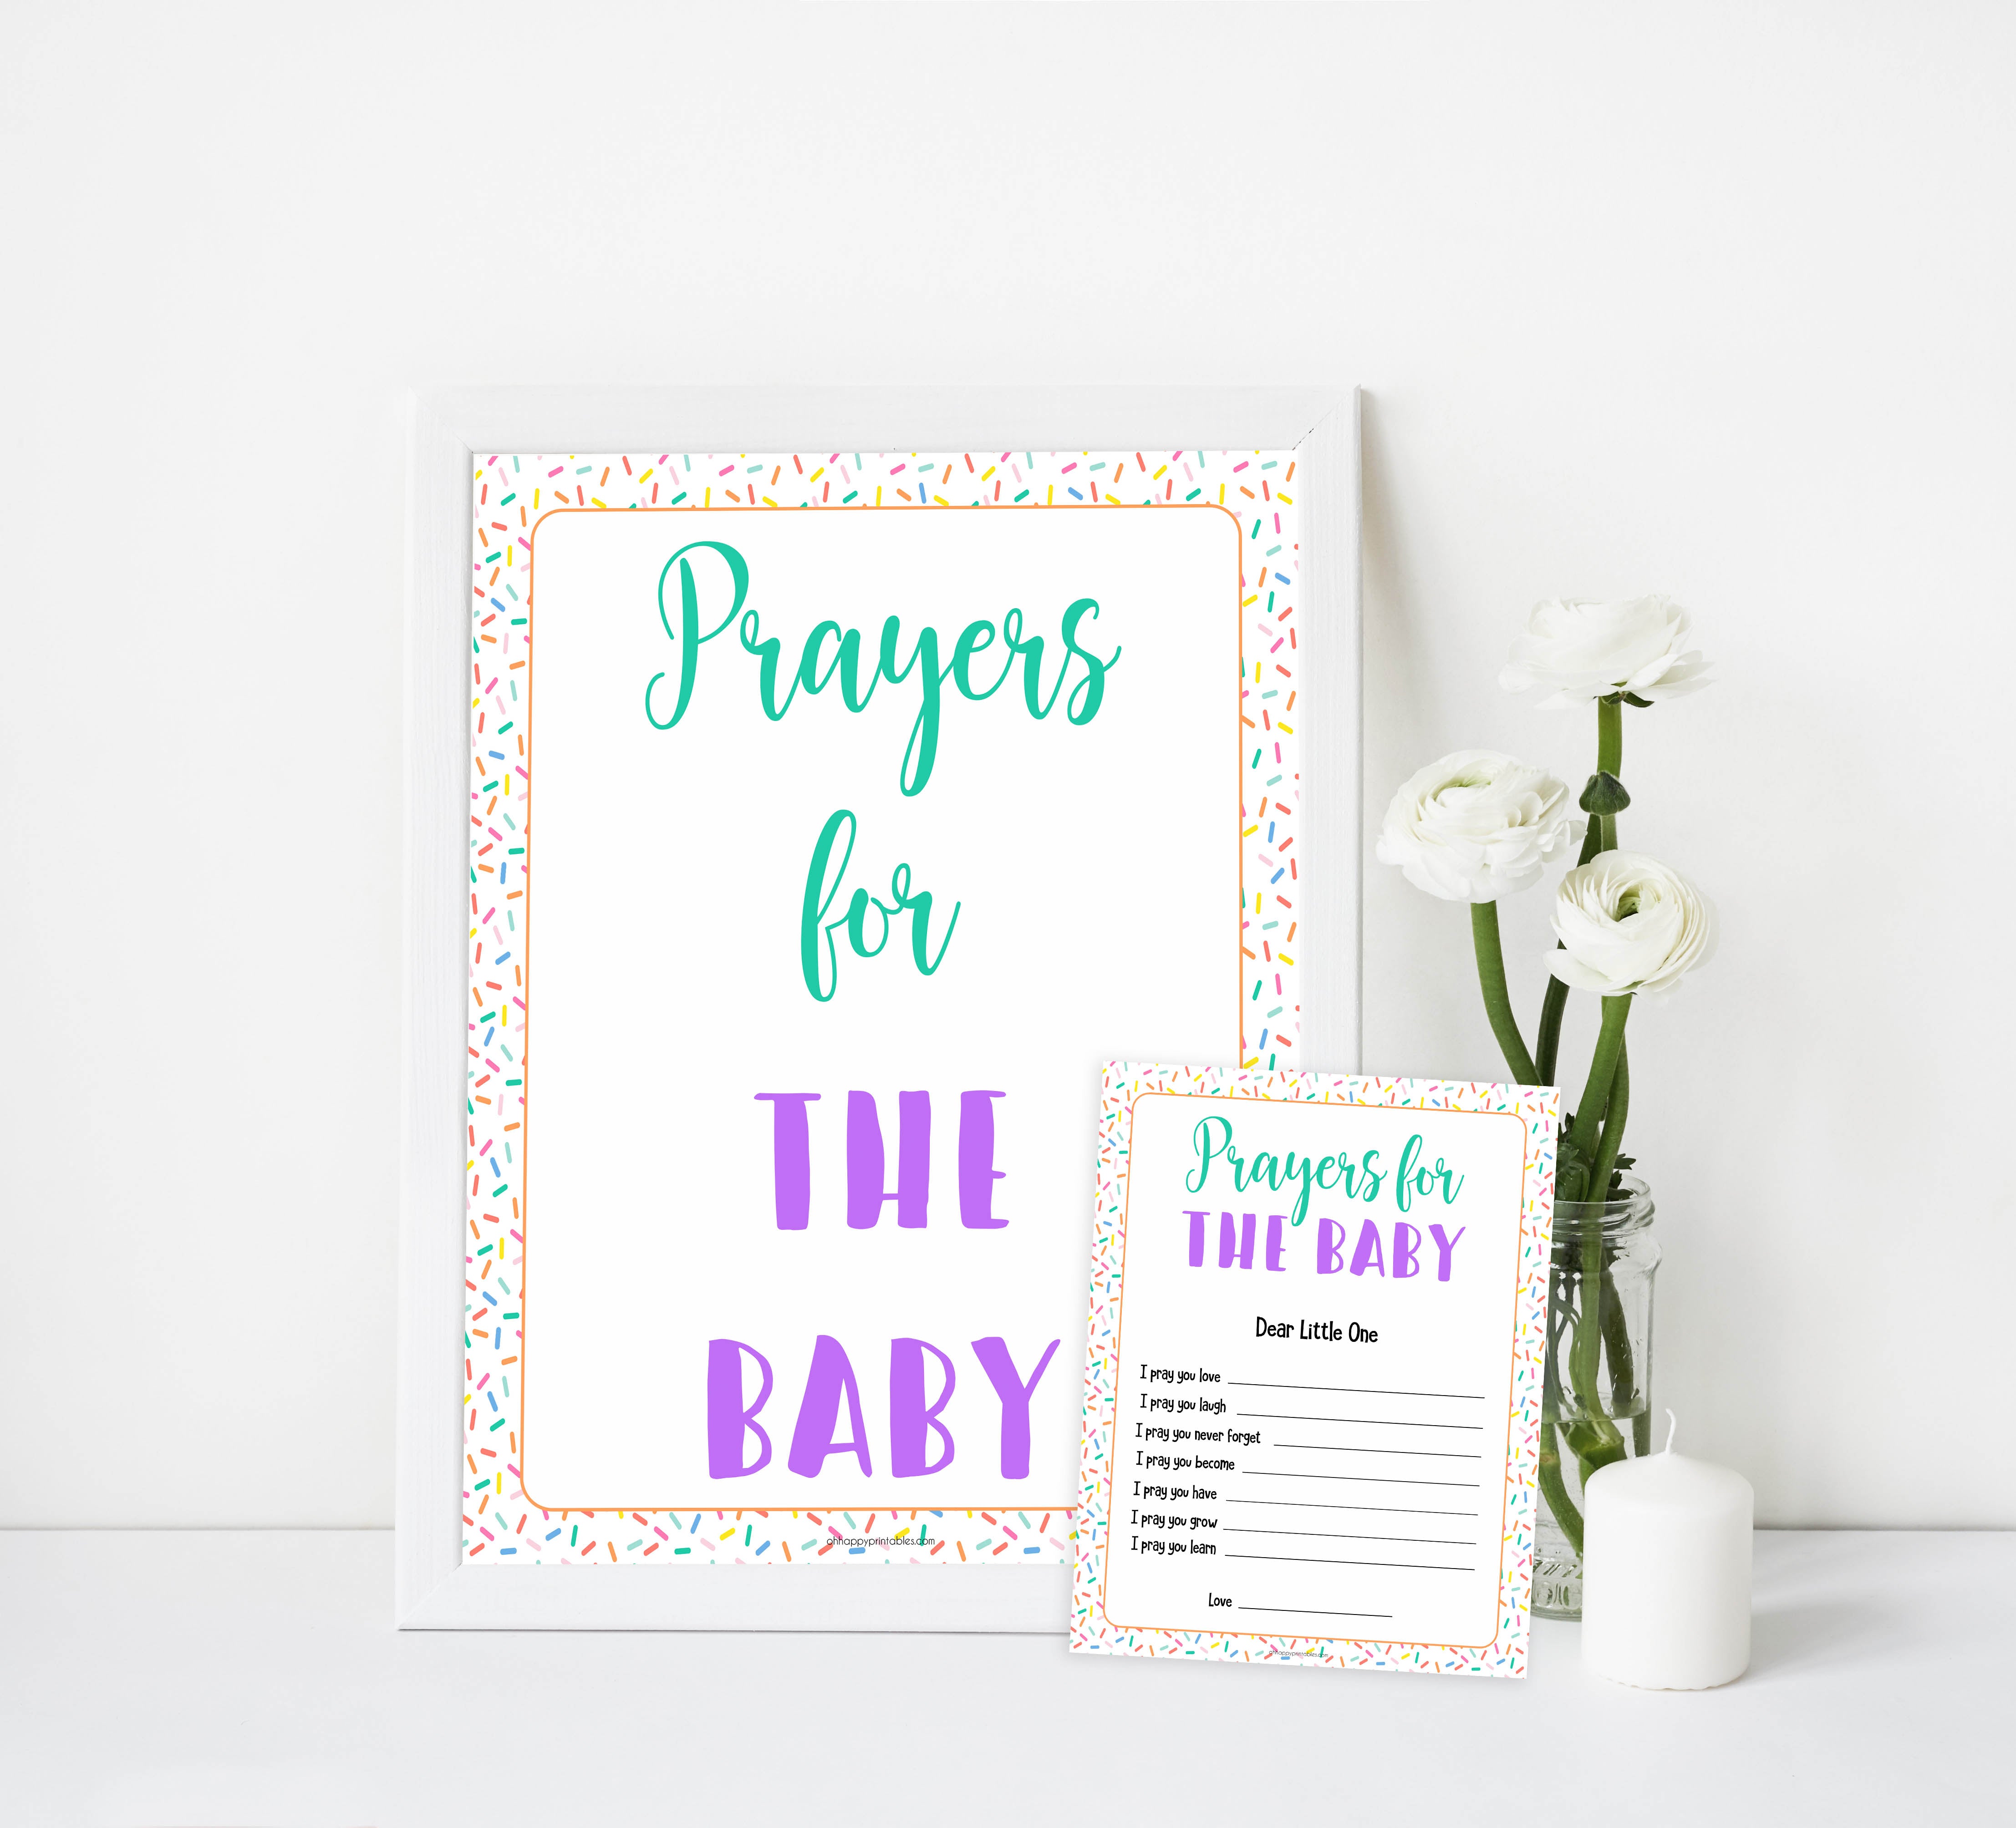 prayers for the baby, Printable baby shower games, baby sprinkle fun baby games, baby shower games, fun baby shower ideas, top baby shower ideas, sprinkle shower baby shower, friends baby shower ideas